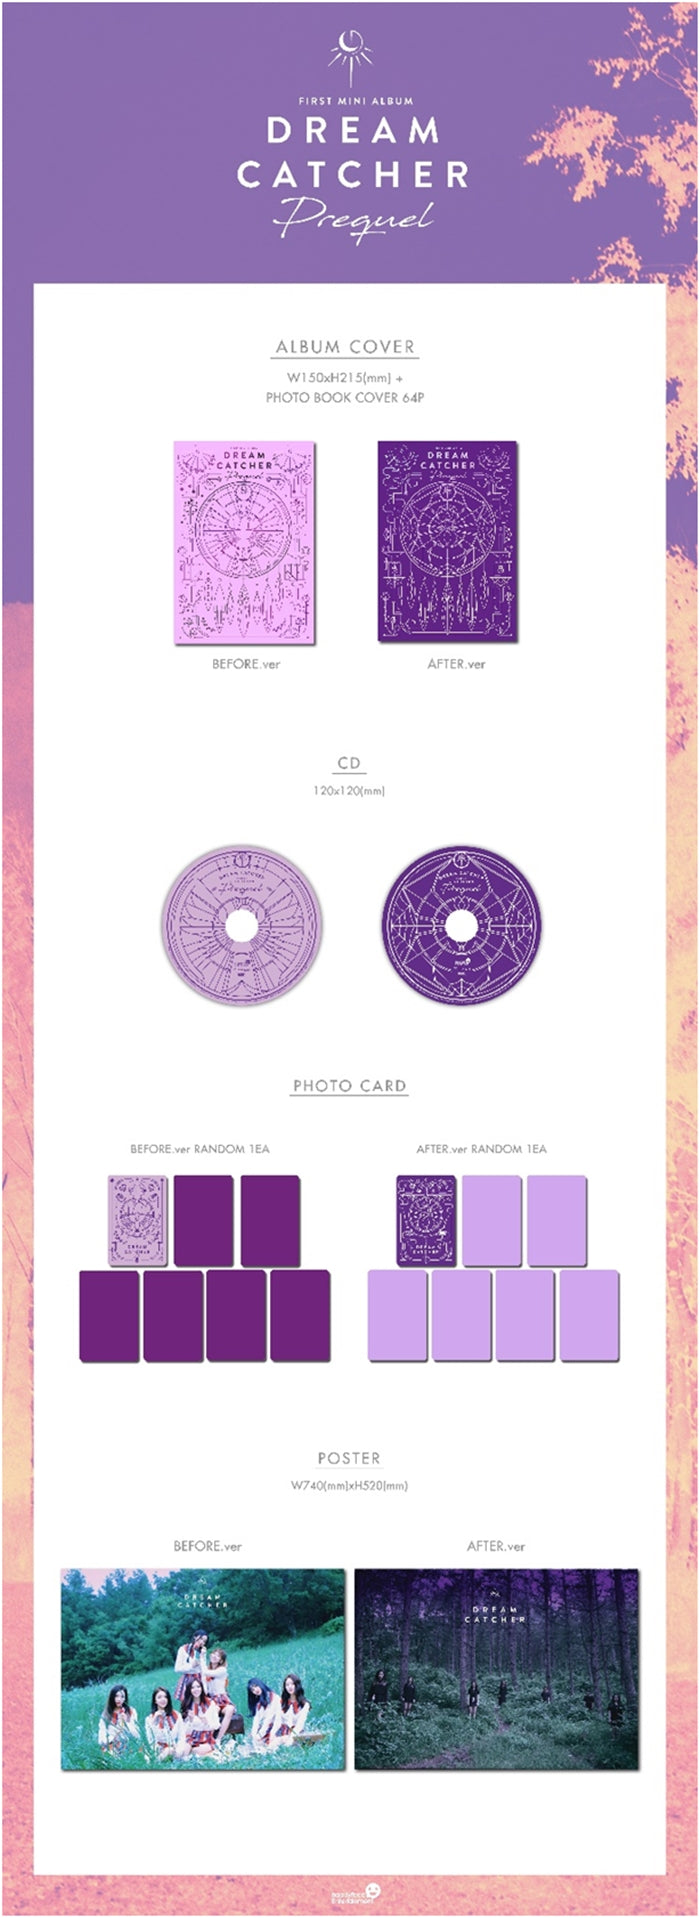 1 CD
1 Photo Card
1 Photo Book (64 pages)